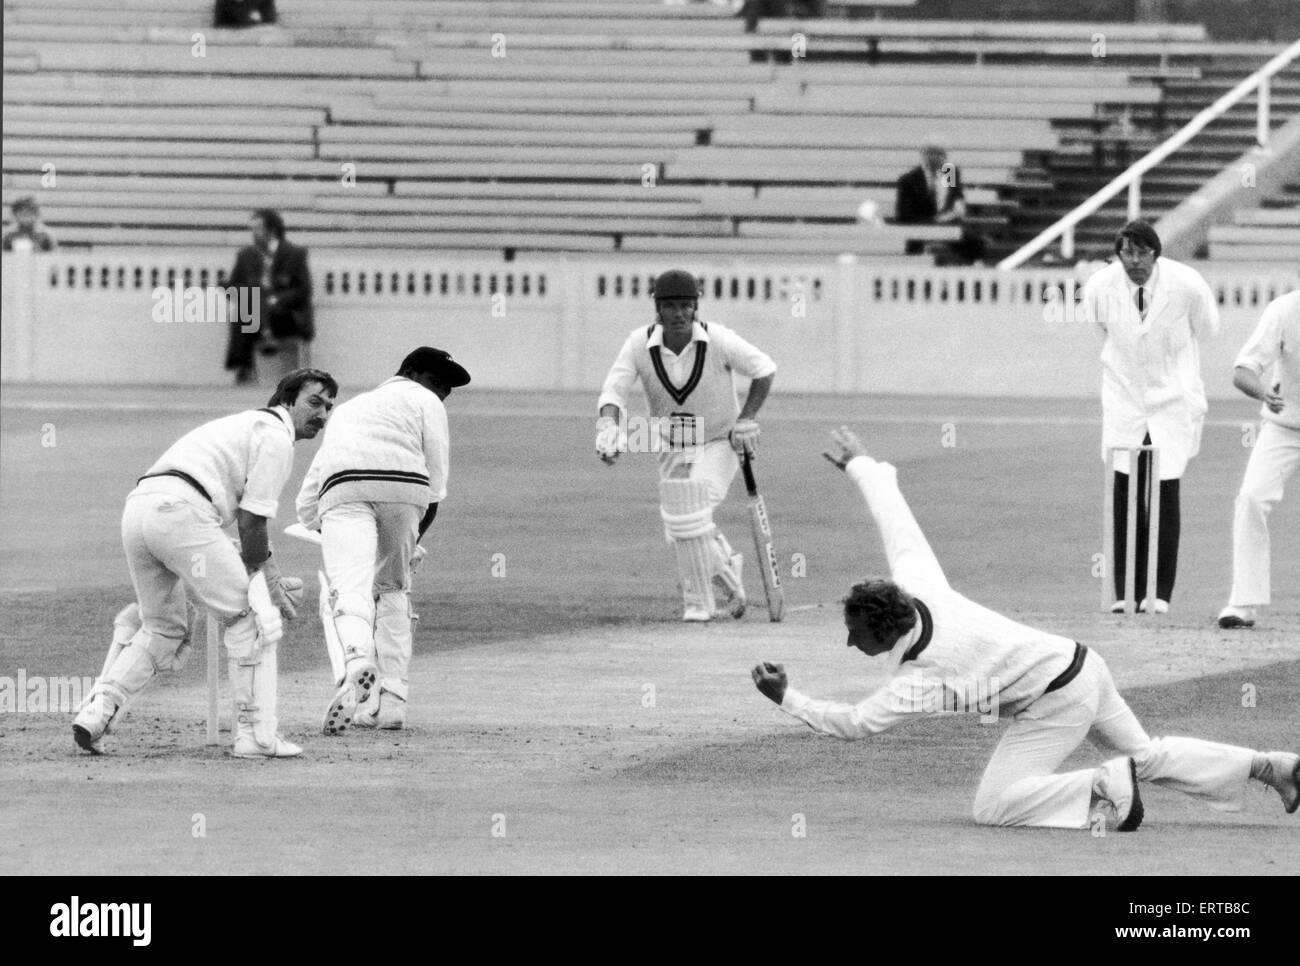 Lancashire Cricket Club V Middlesex, Lloyd makes the catch. 22nd June 1979. Stock Photo